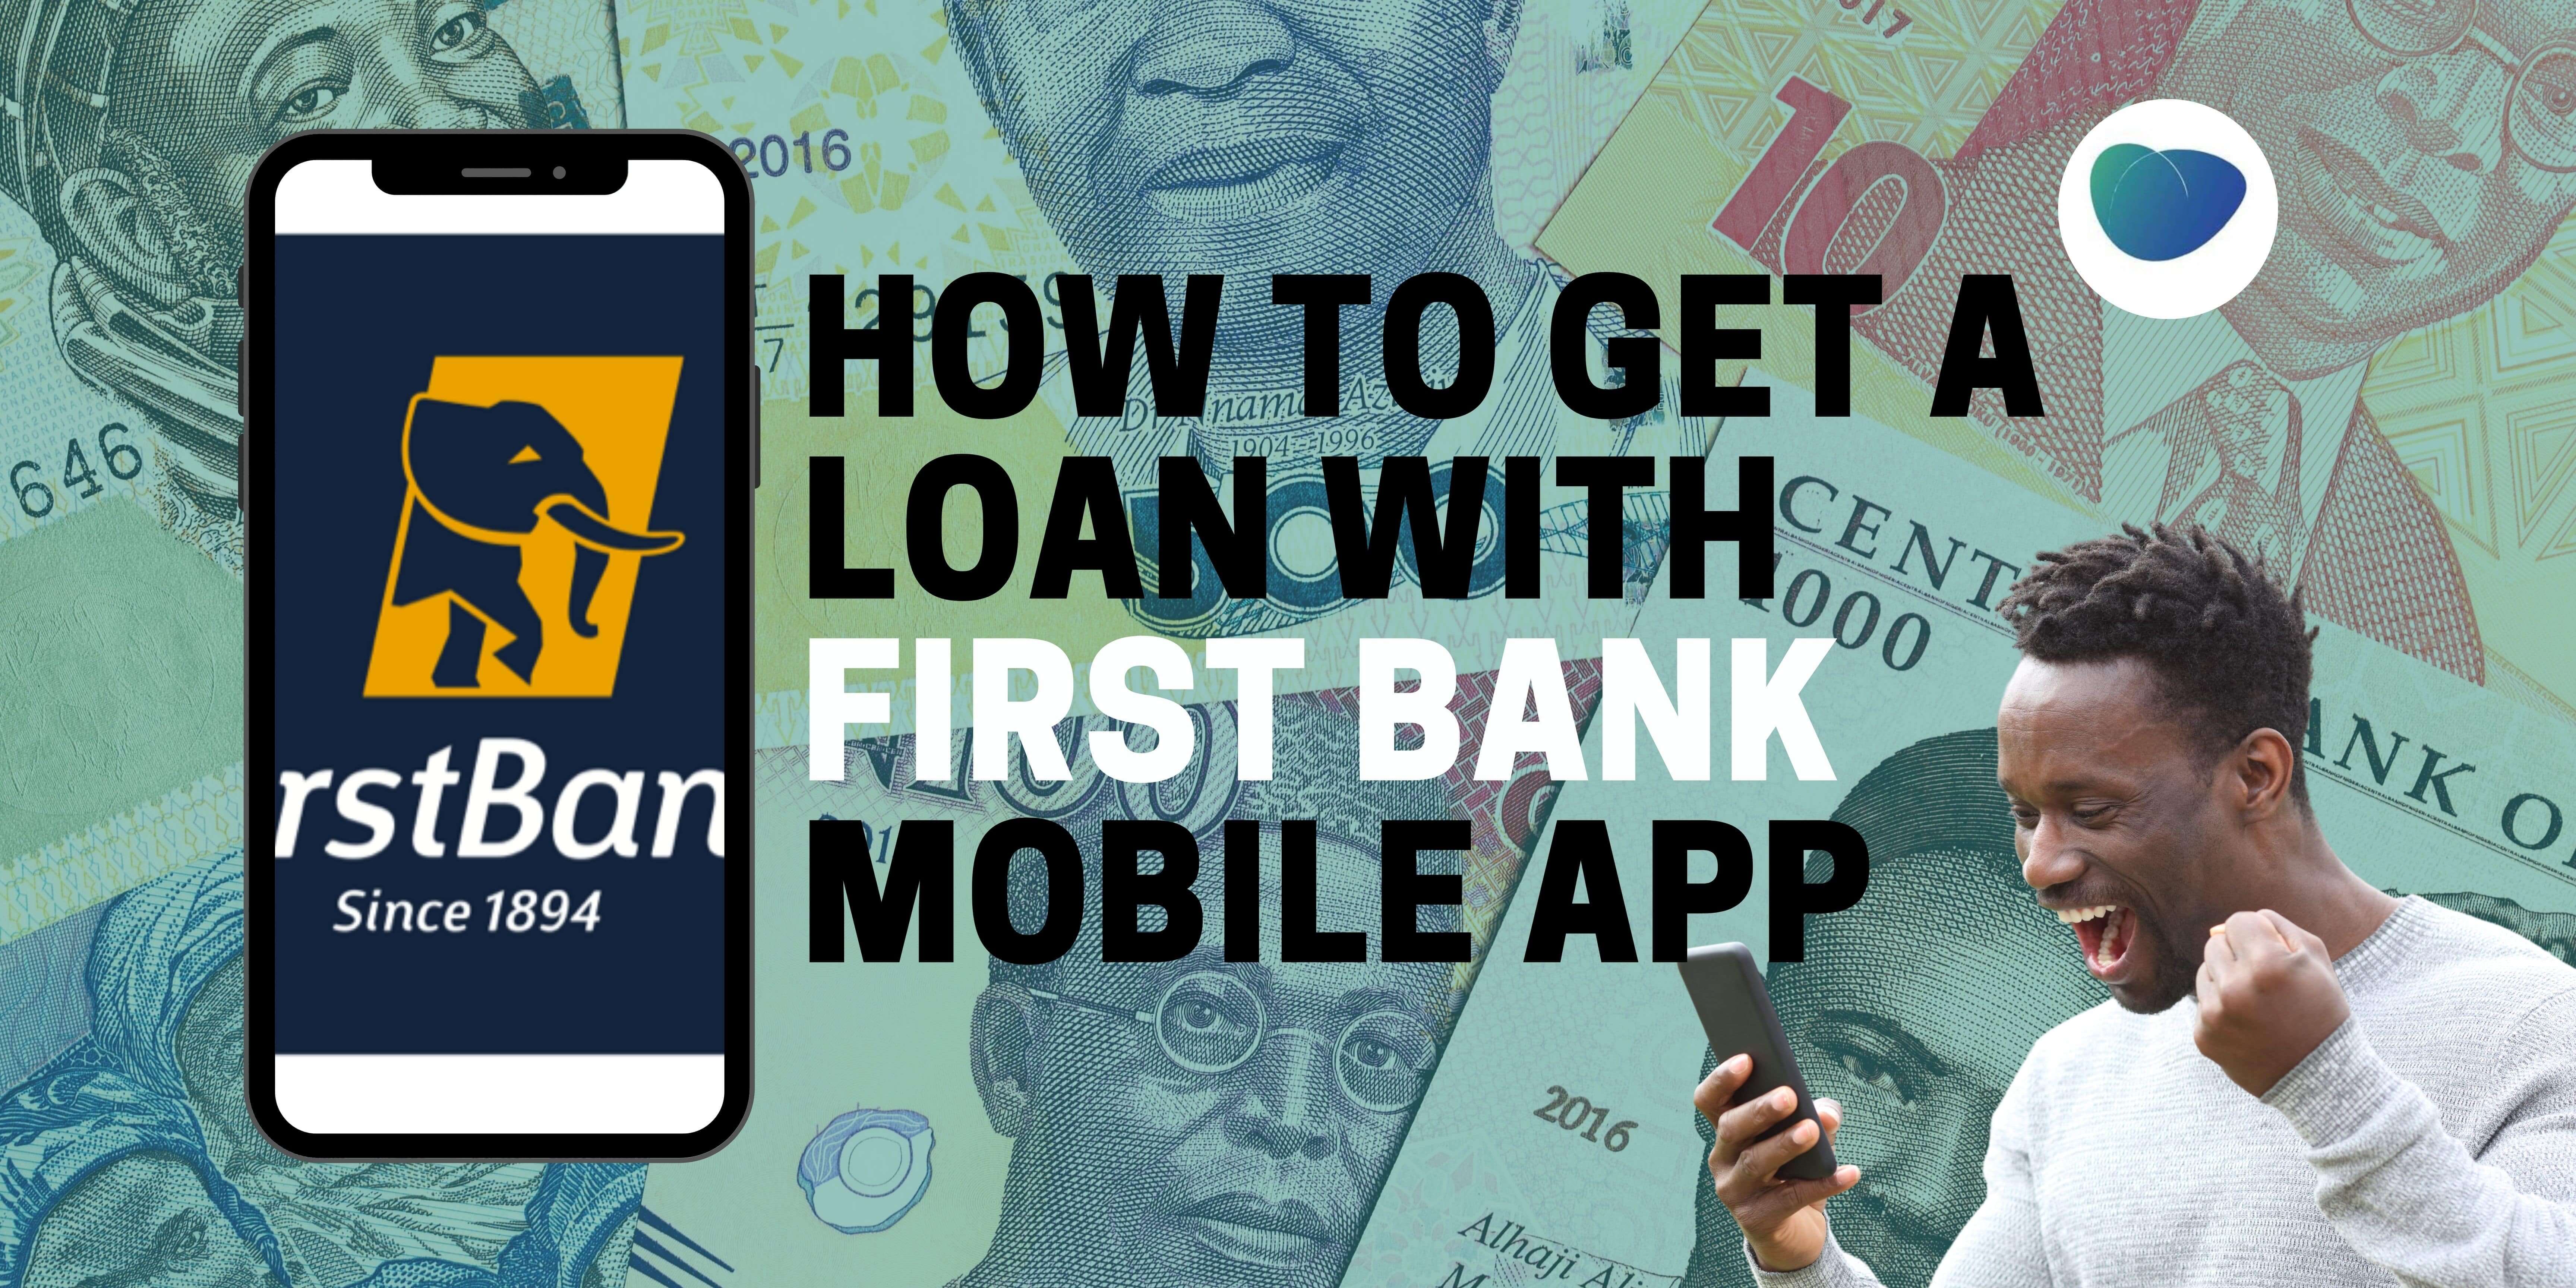 first bank mobile app